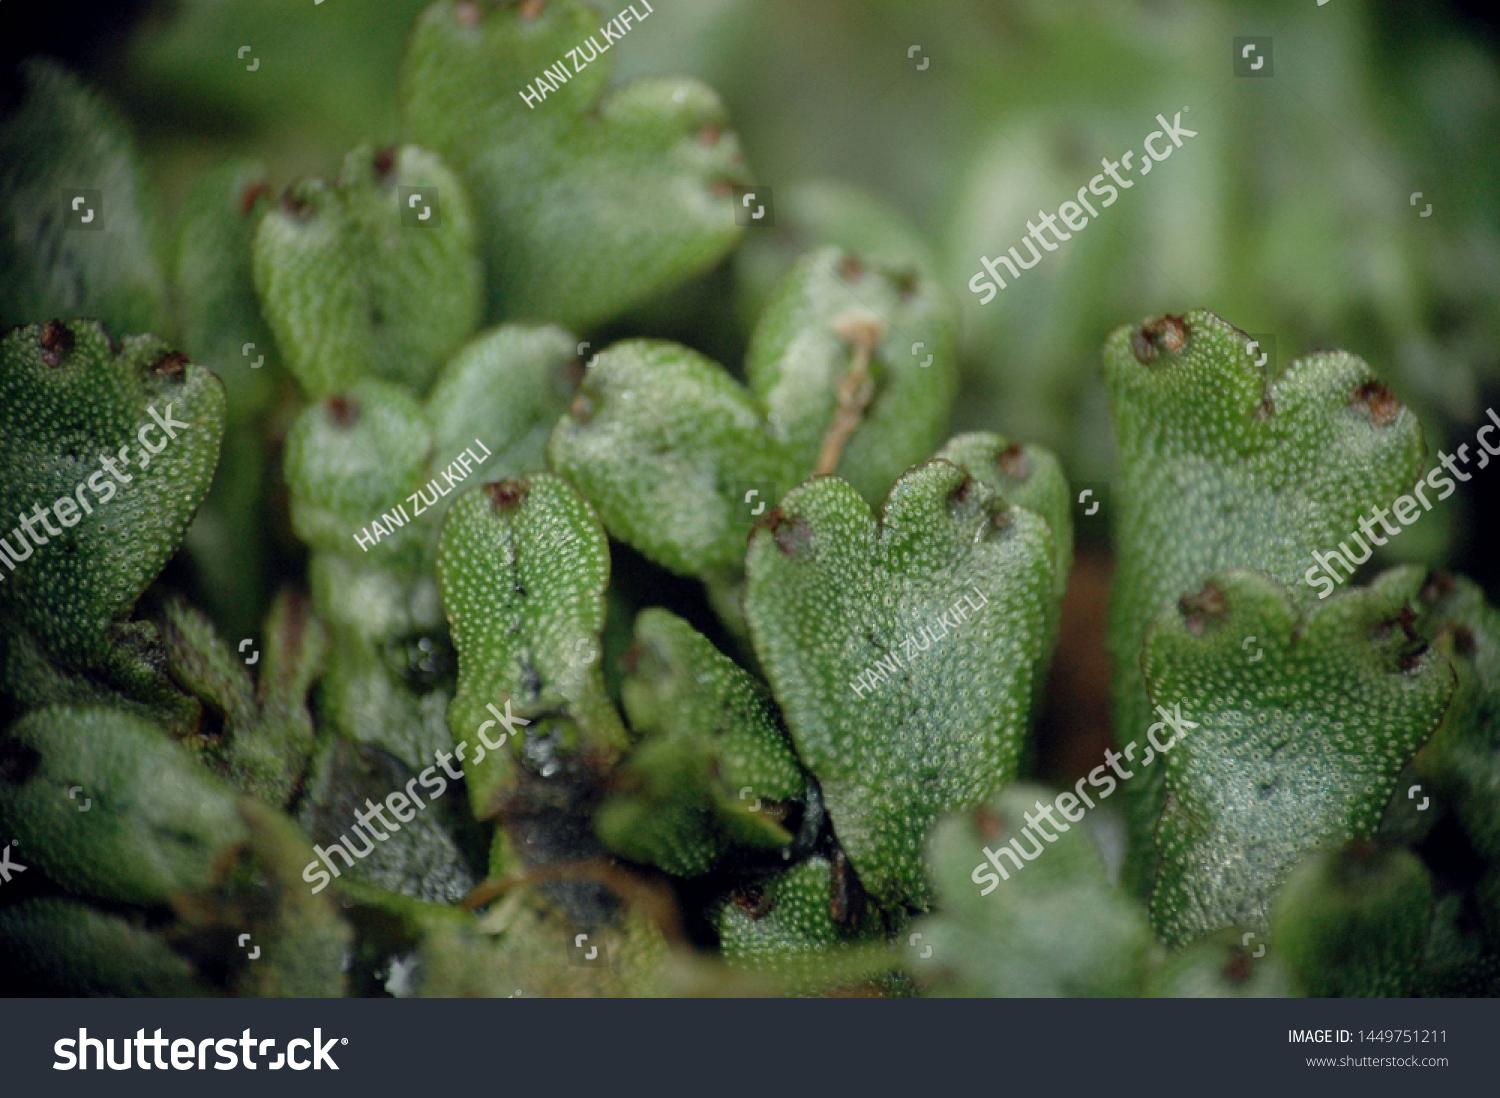 stock-photo-collection-of-bryophytes-and-few-liverworts-found-in-jemaloi-valley-kenaboi-state-park-located-in-1449751211.jpg